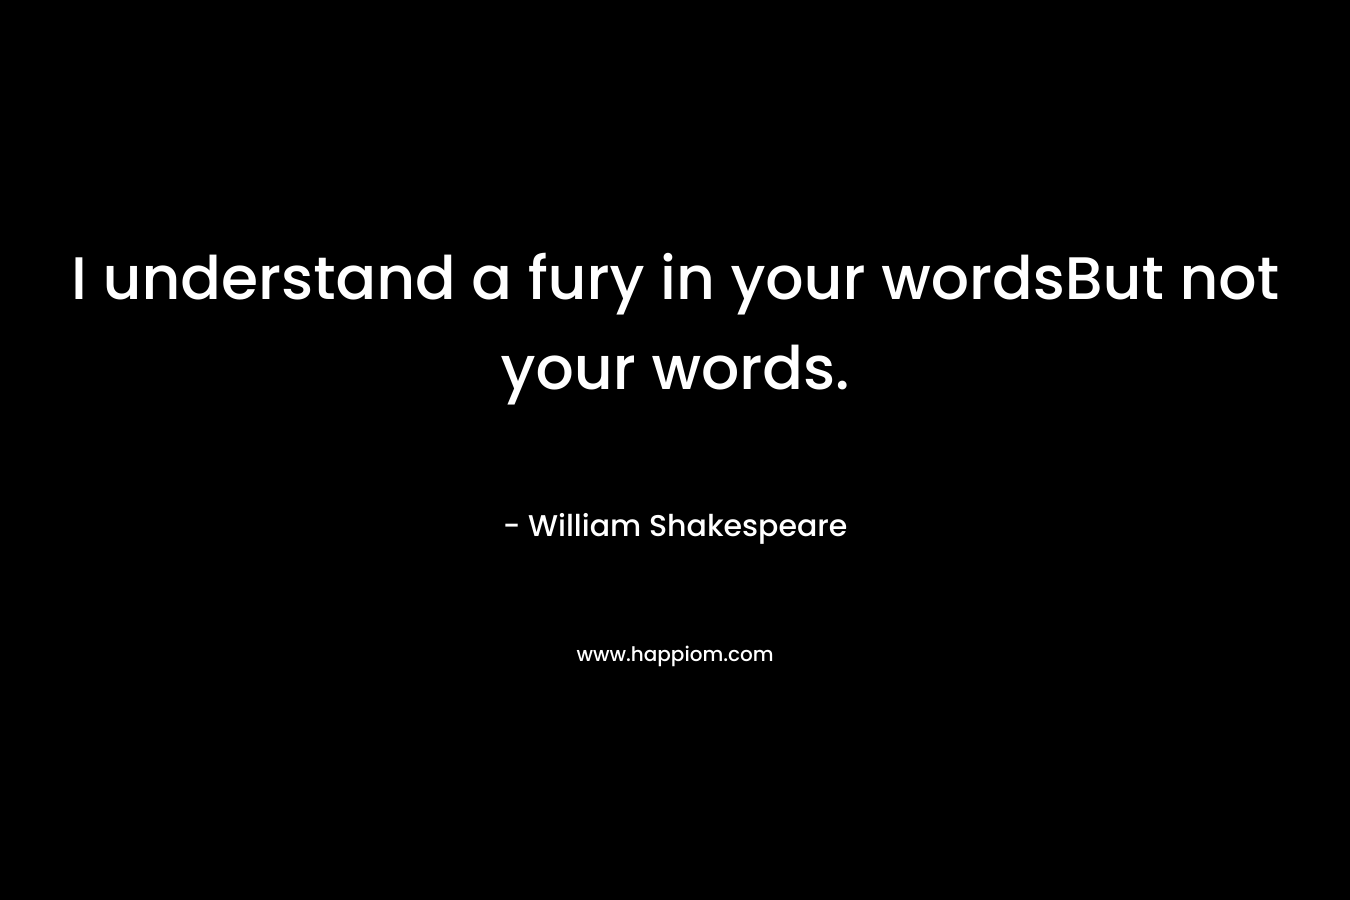 I understand a fury in your wordsBut not your words. – William Shakespeare